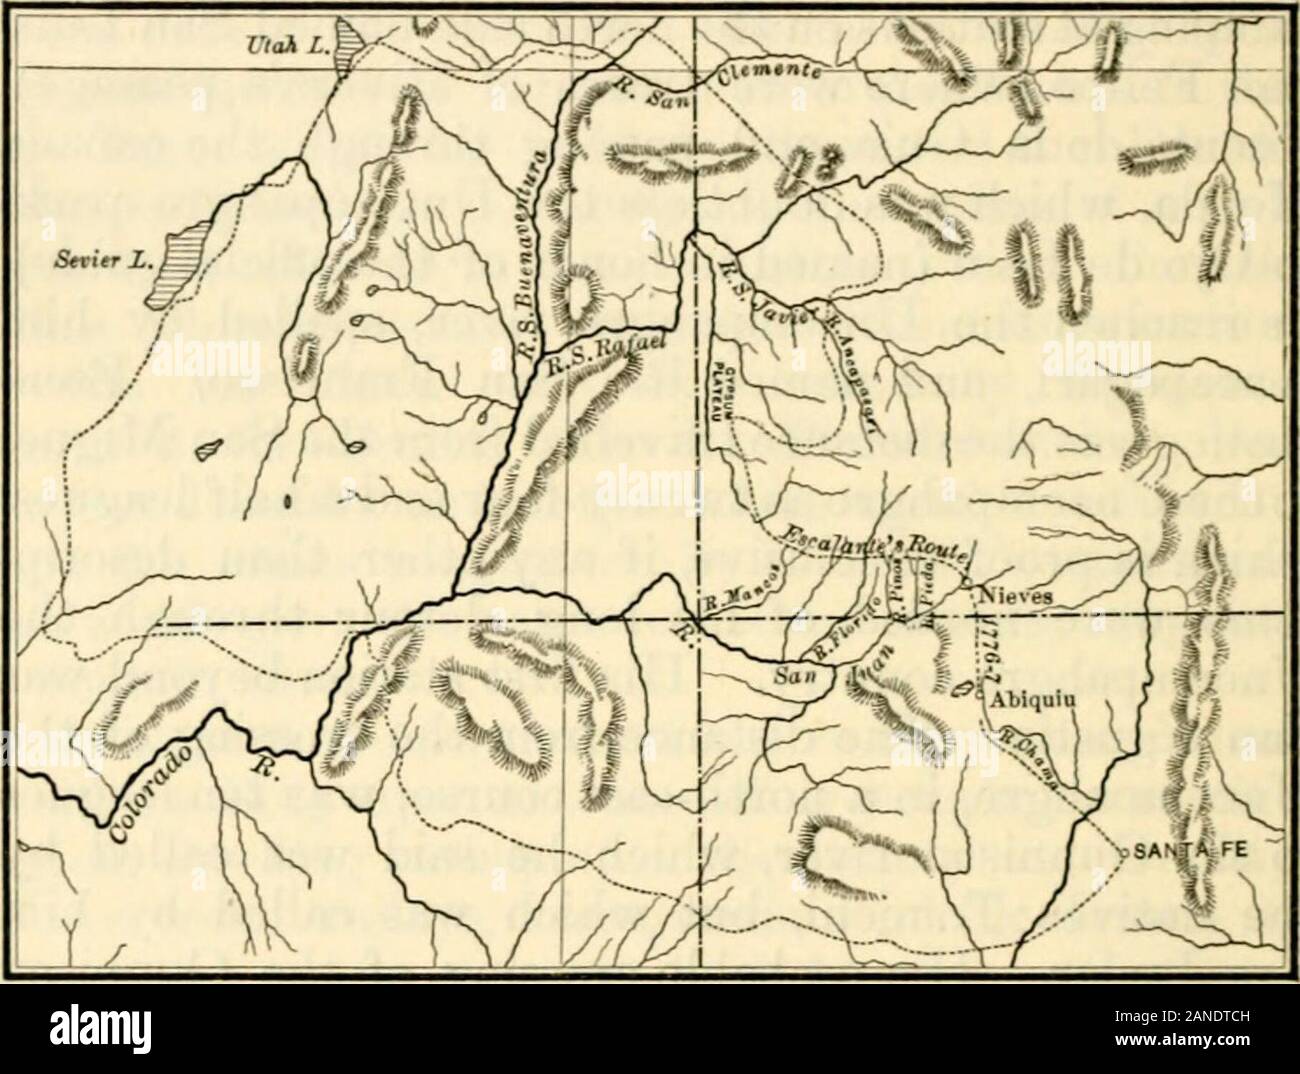 History of Nevada, Colorado, and Wyoming, 1540-1888 . ^ of Utali, having spent a littlemore than two mouths on the journey, and travelled. Escalantes Routb. from the Dolores 86J leagues. In two places on hisroute Escalante mentioned other roads, and especiallythat there was a shorter way from the Gunnison tothe Grand river than the one he was taking. Hecrossed this road near the stream he called SantaRosalia. Beyond White river be found hills ofloose slate, passed through a long cafion, on the wallof which were painted three shields and a spear, andtwo warriors in combat ; saw veins of metal, Stock Photo